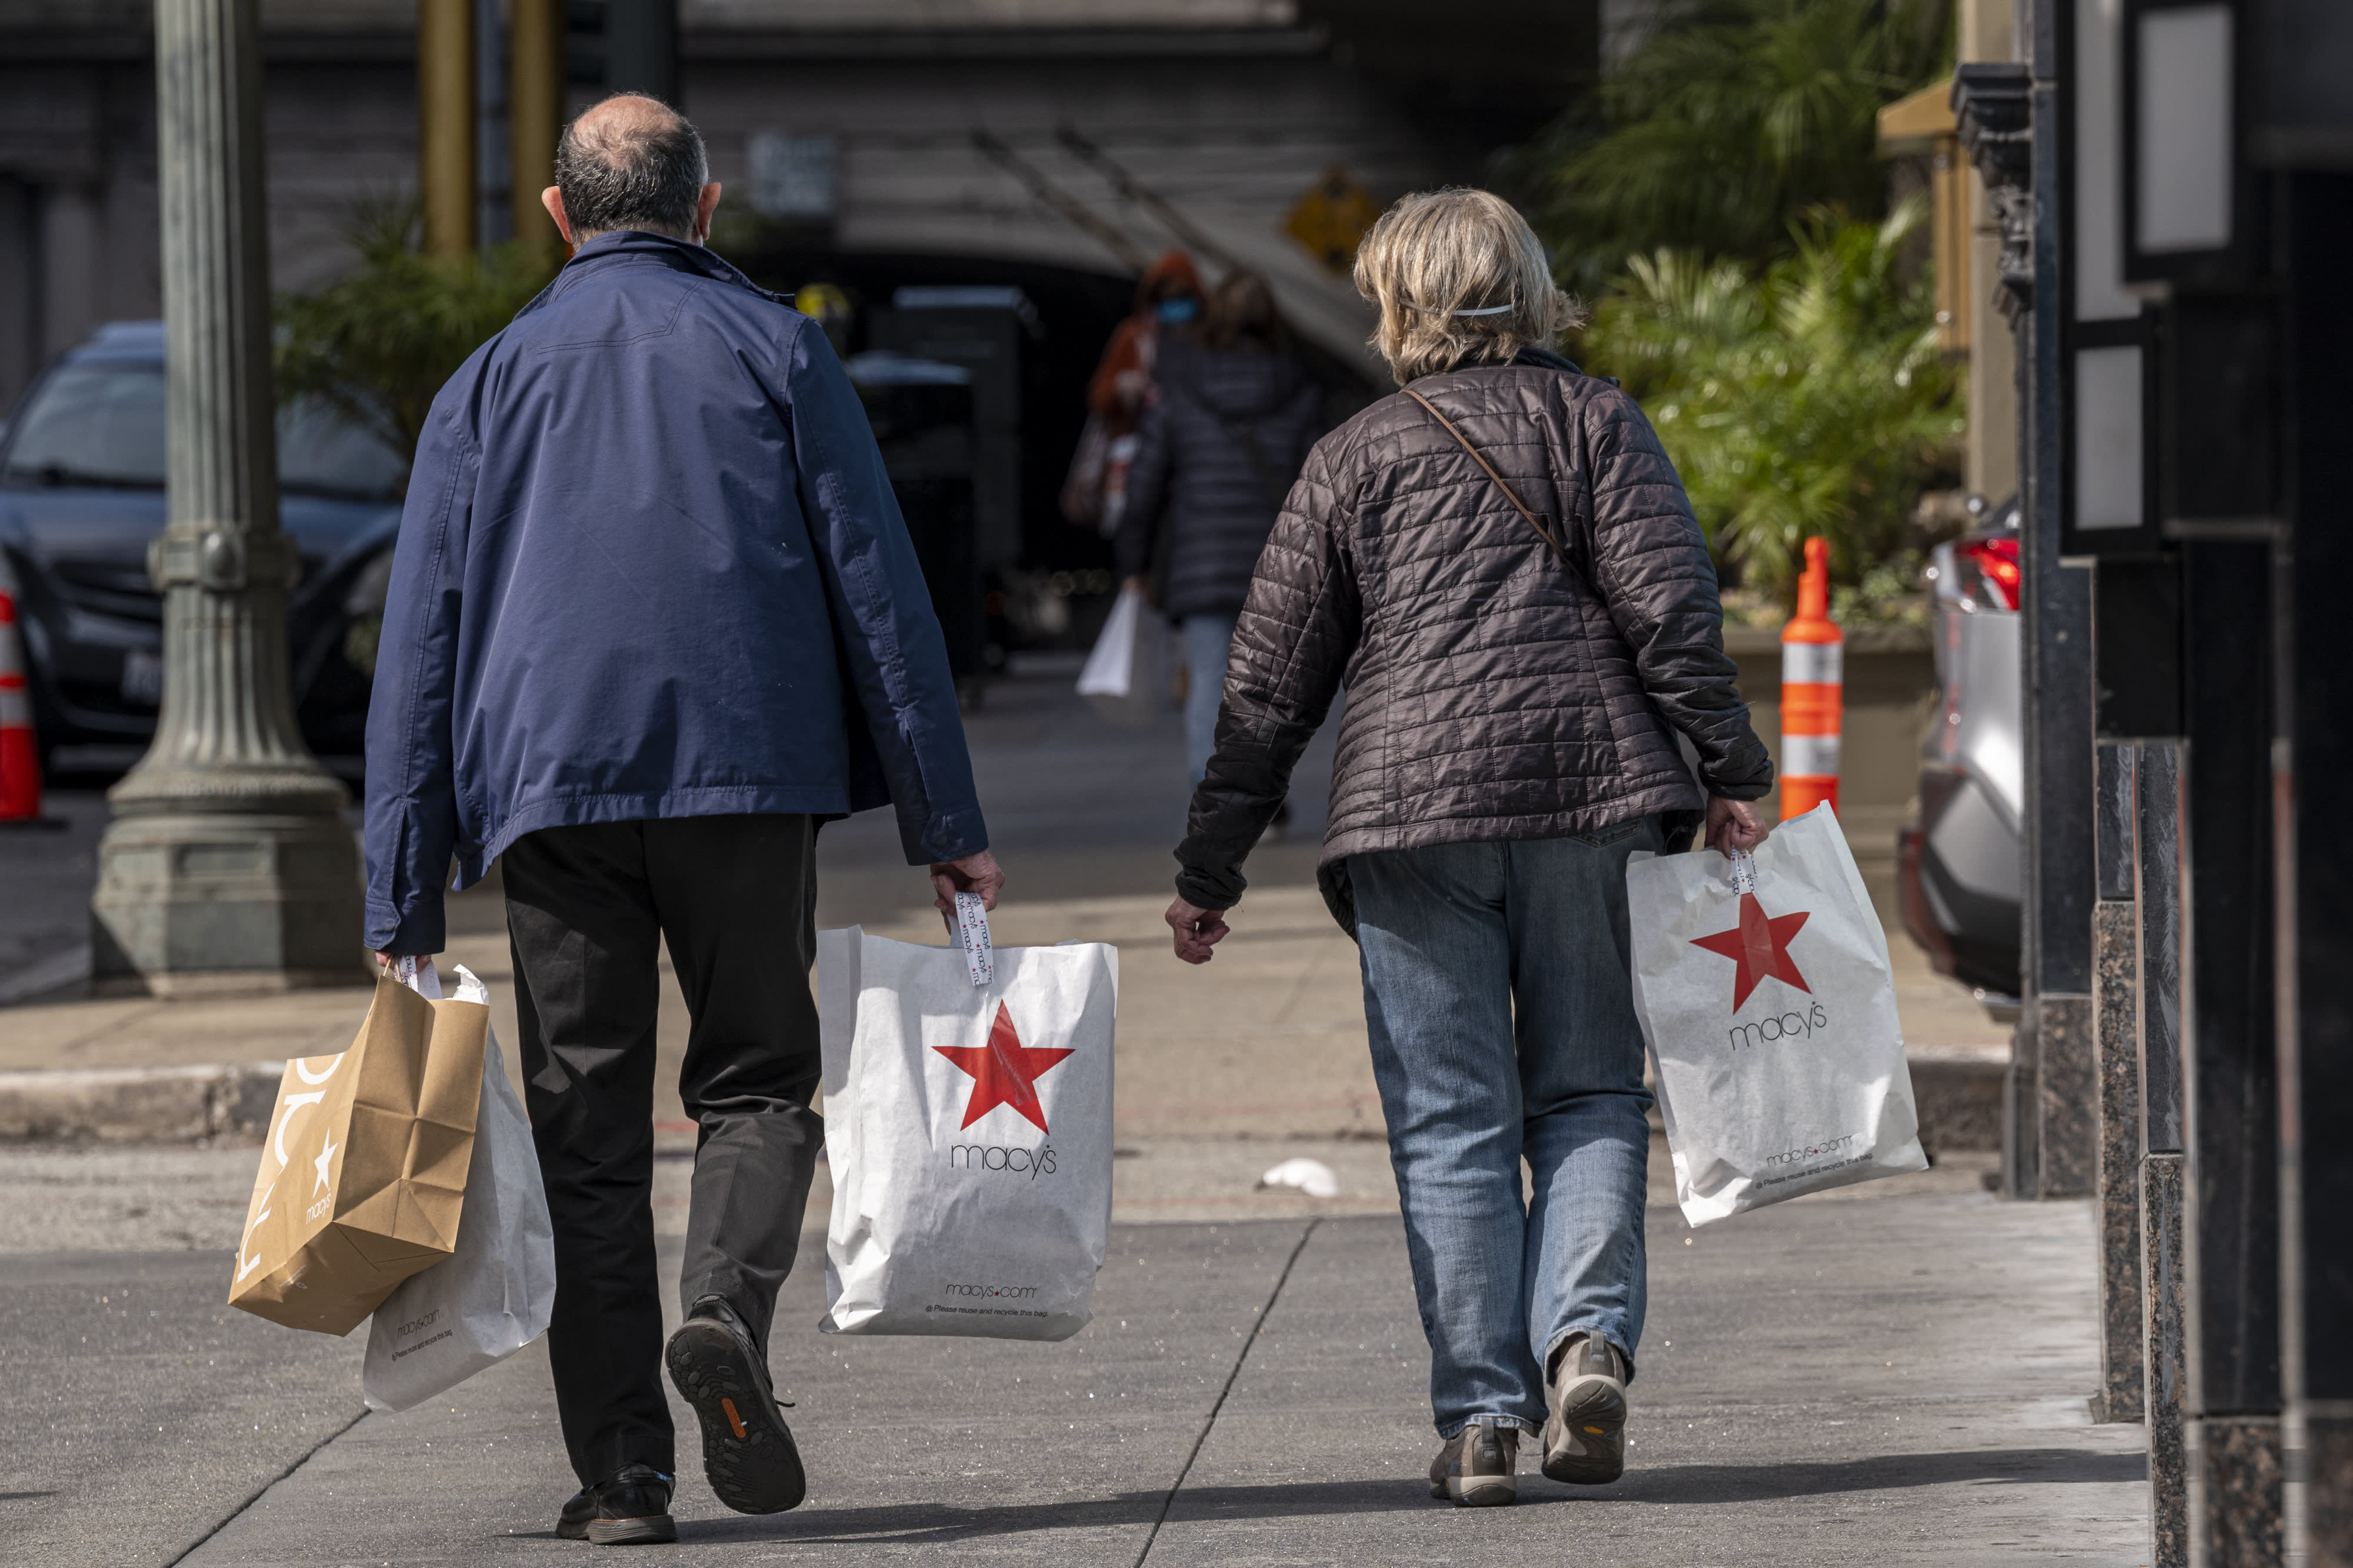 Macy’s CFO says the American consumer is still healthy, but lower-income shoppers could soon cut back